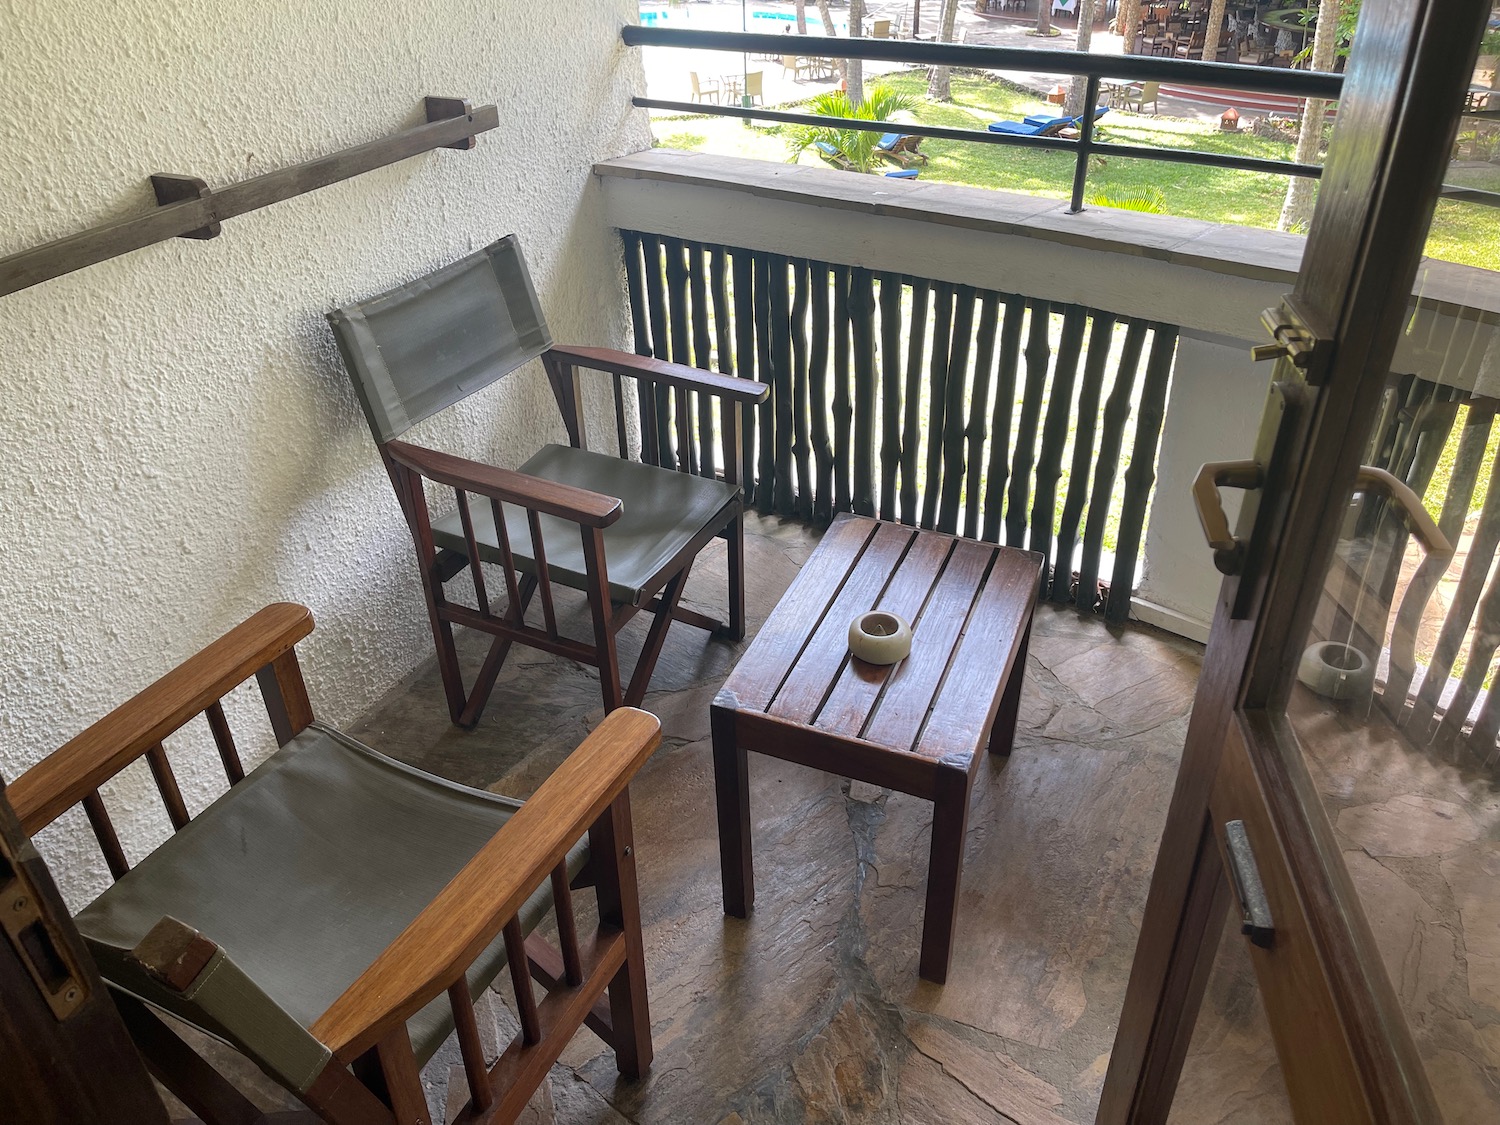 a patio with chairs and a table